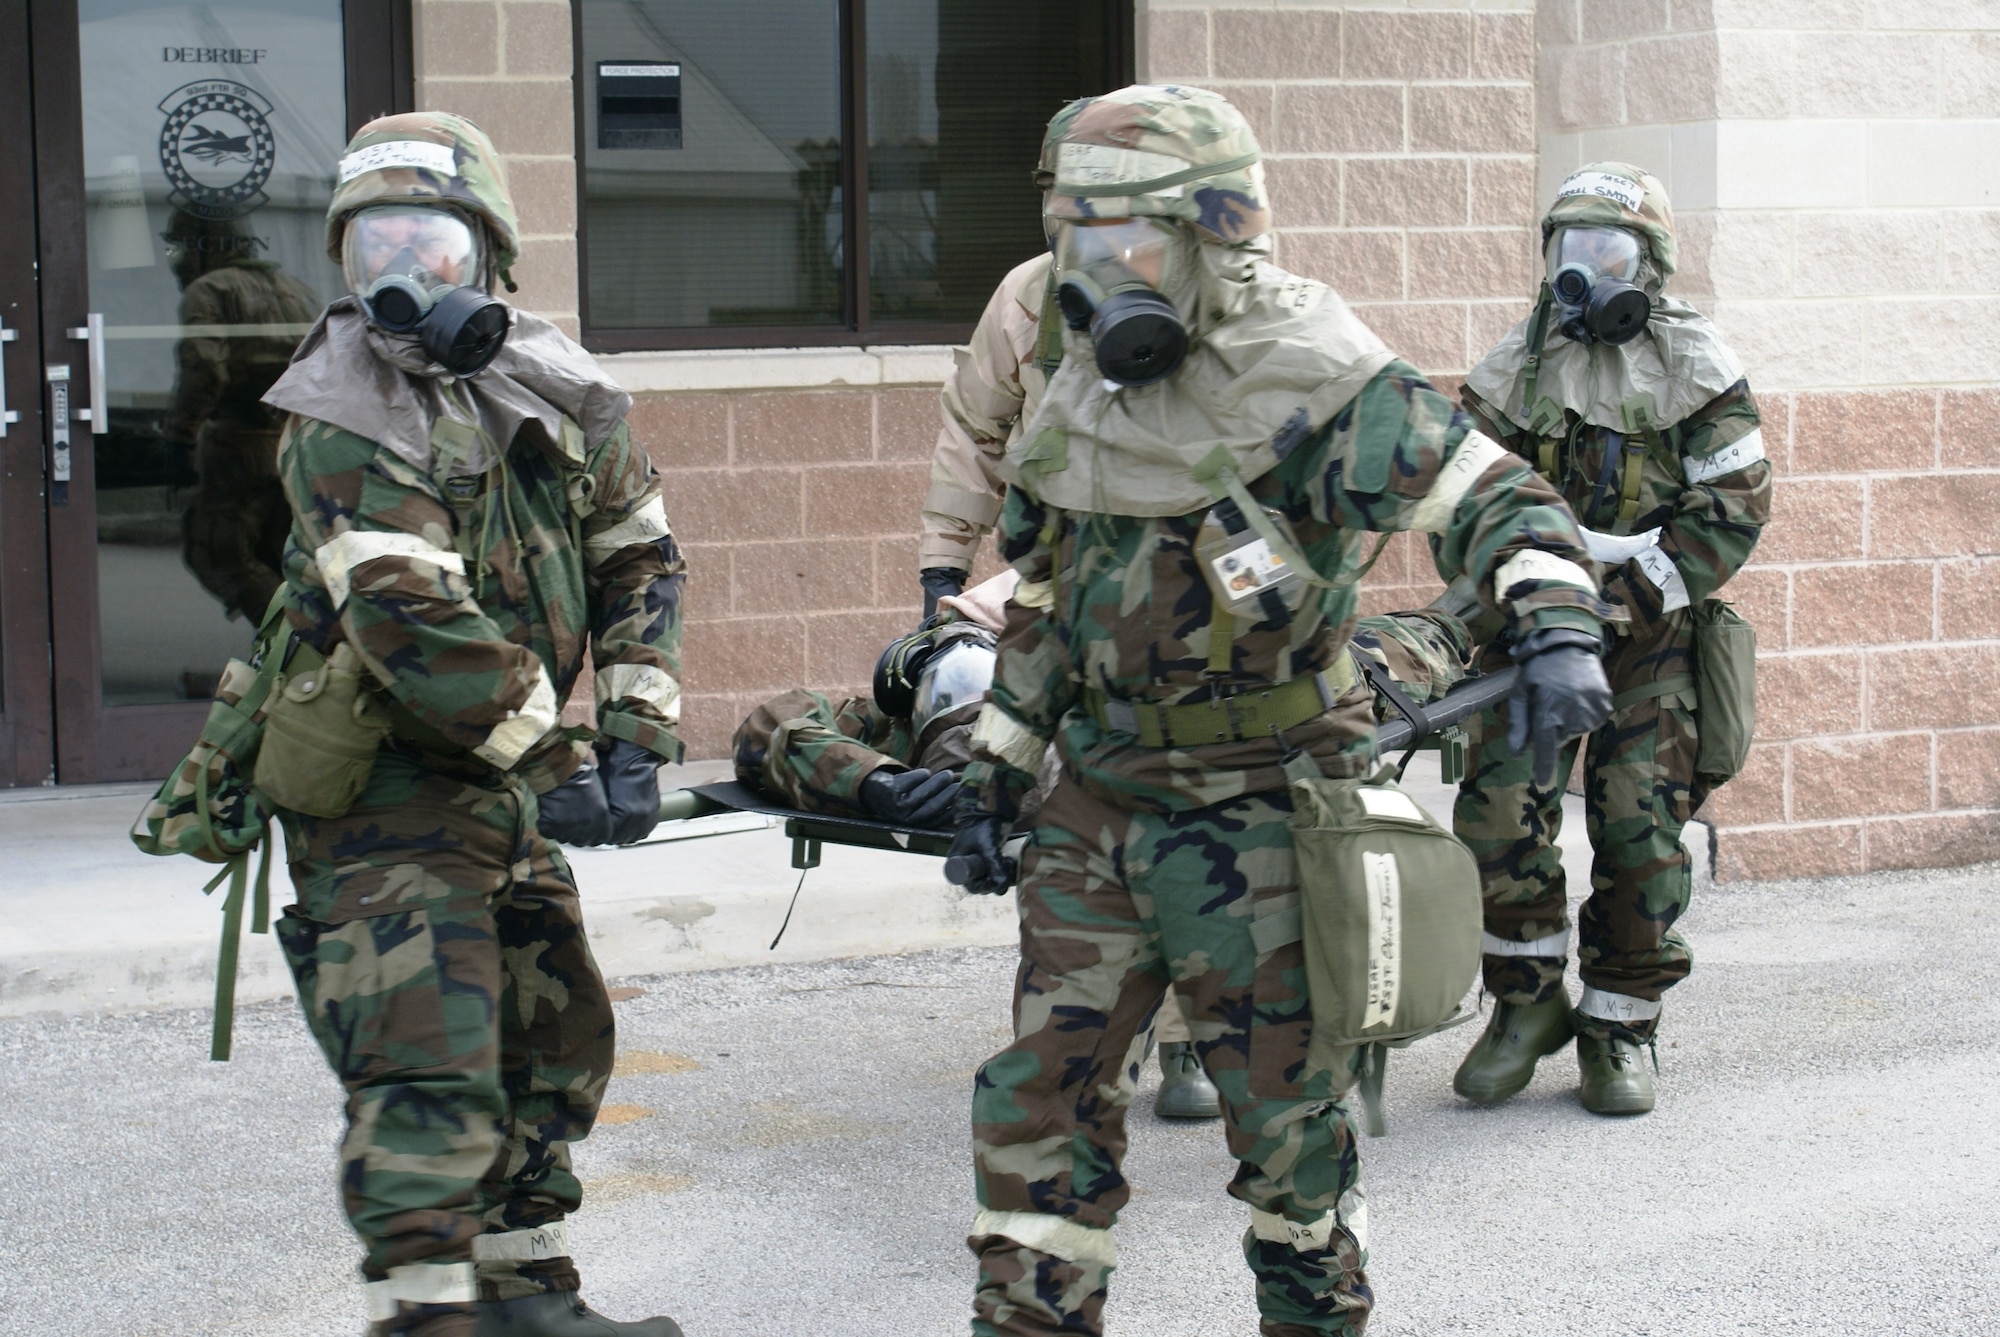 Members from the 482nd Maintenance Squadron, transport an injured member to the casualty collection point after a simulated attack during Operation Deliberate Tropic, Homestead Air Reserve Base, March 10, 2008.  The Operational Readiness Exercise is a self-assessment of the wing’s ability to perform in a simulated combat environment. Explosive devices, smoke grenades and sirens will be used during the exercise to create realistic scenarios that reservists will encounter during the exercise. “Homestead Air Reserve Base goes to great lengths to ensure safety procedures are established and followed during exercises to prepare our reservists for deployment,” said Mr. Sean Quinn, 482nd Mission Support Group Emergency Management Office. (U.S. Air Force photo/Tim Norton)
